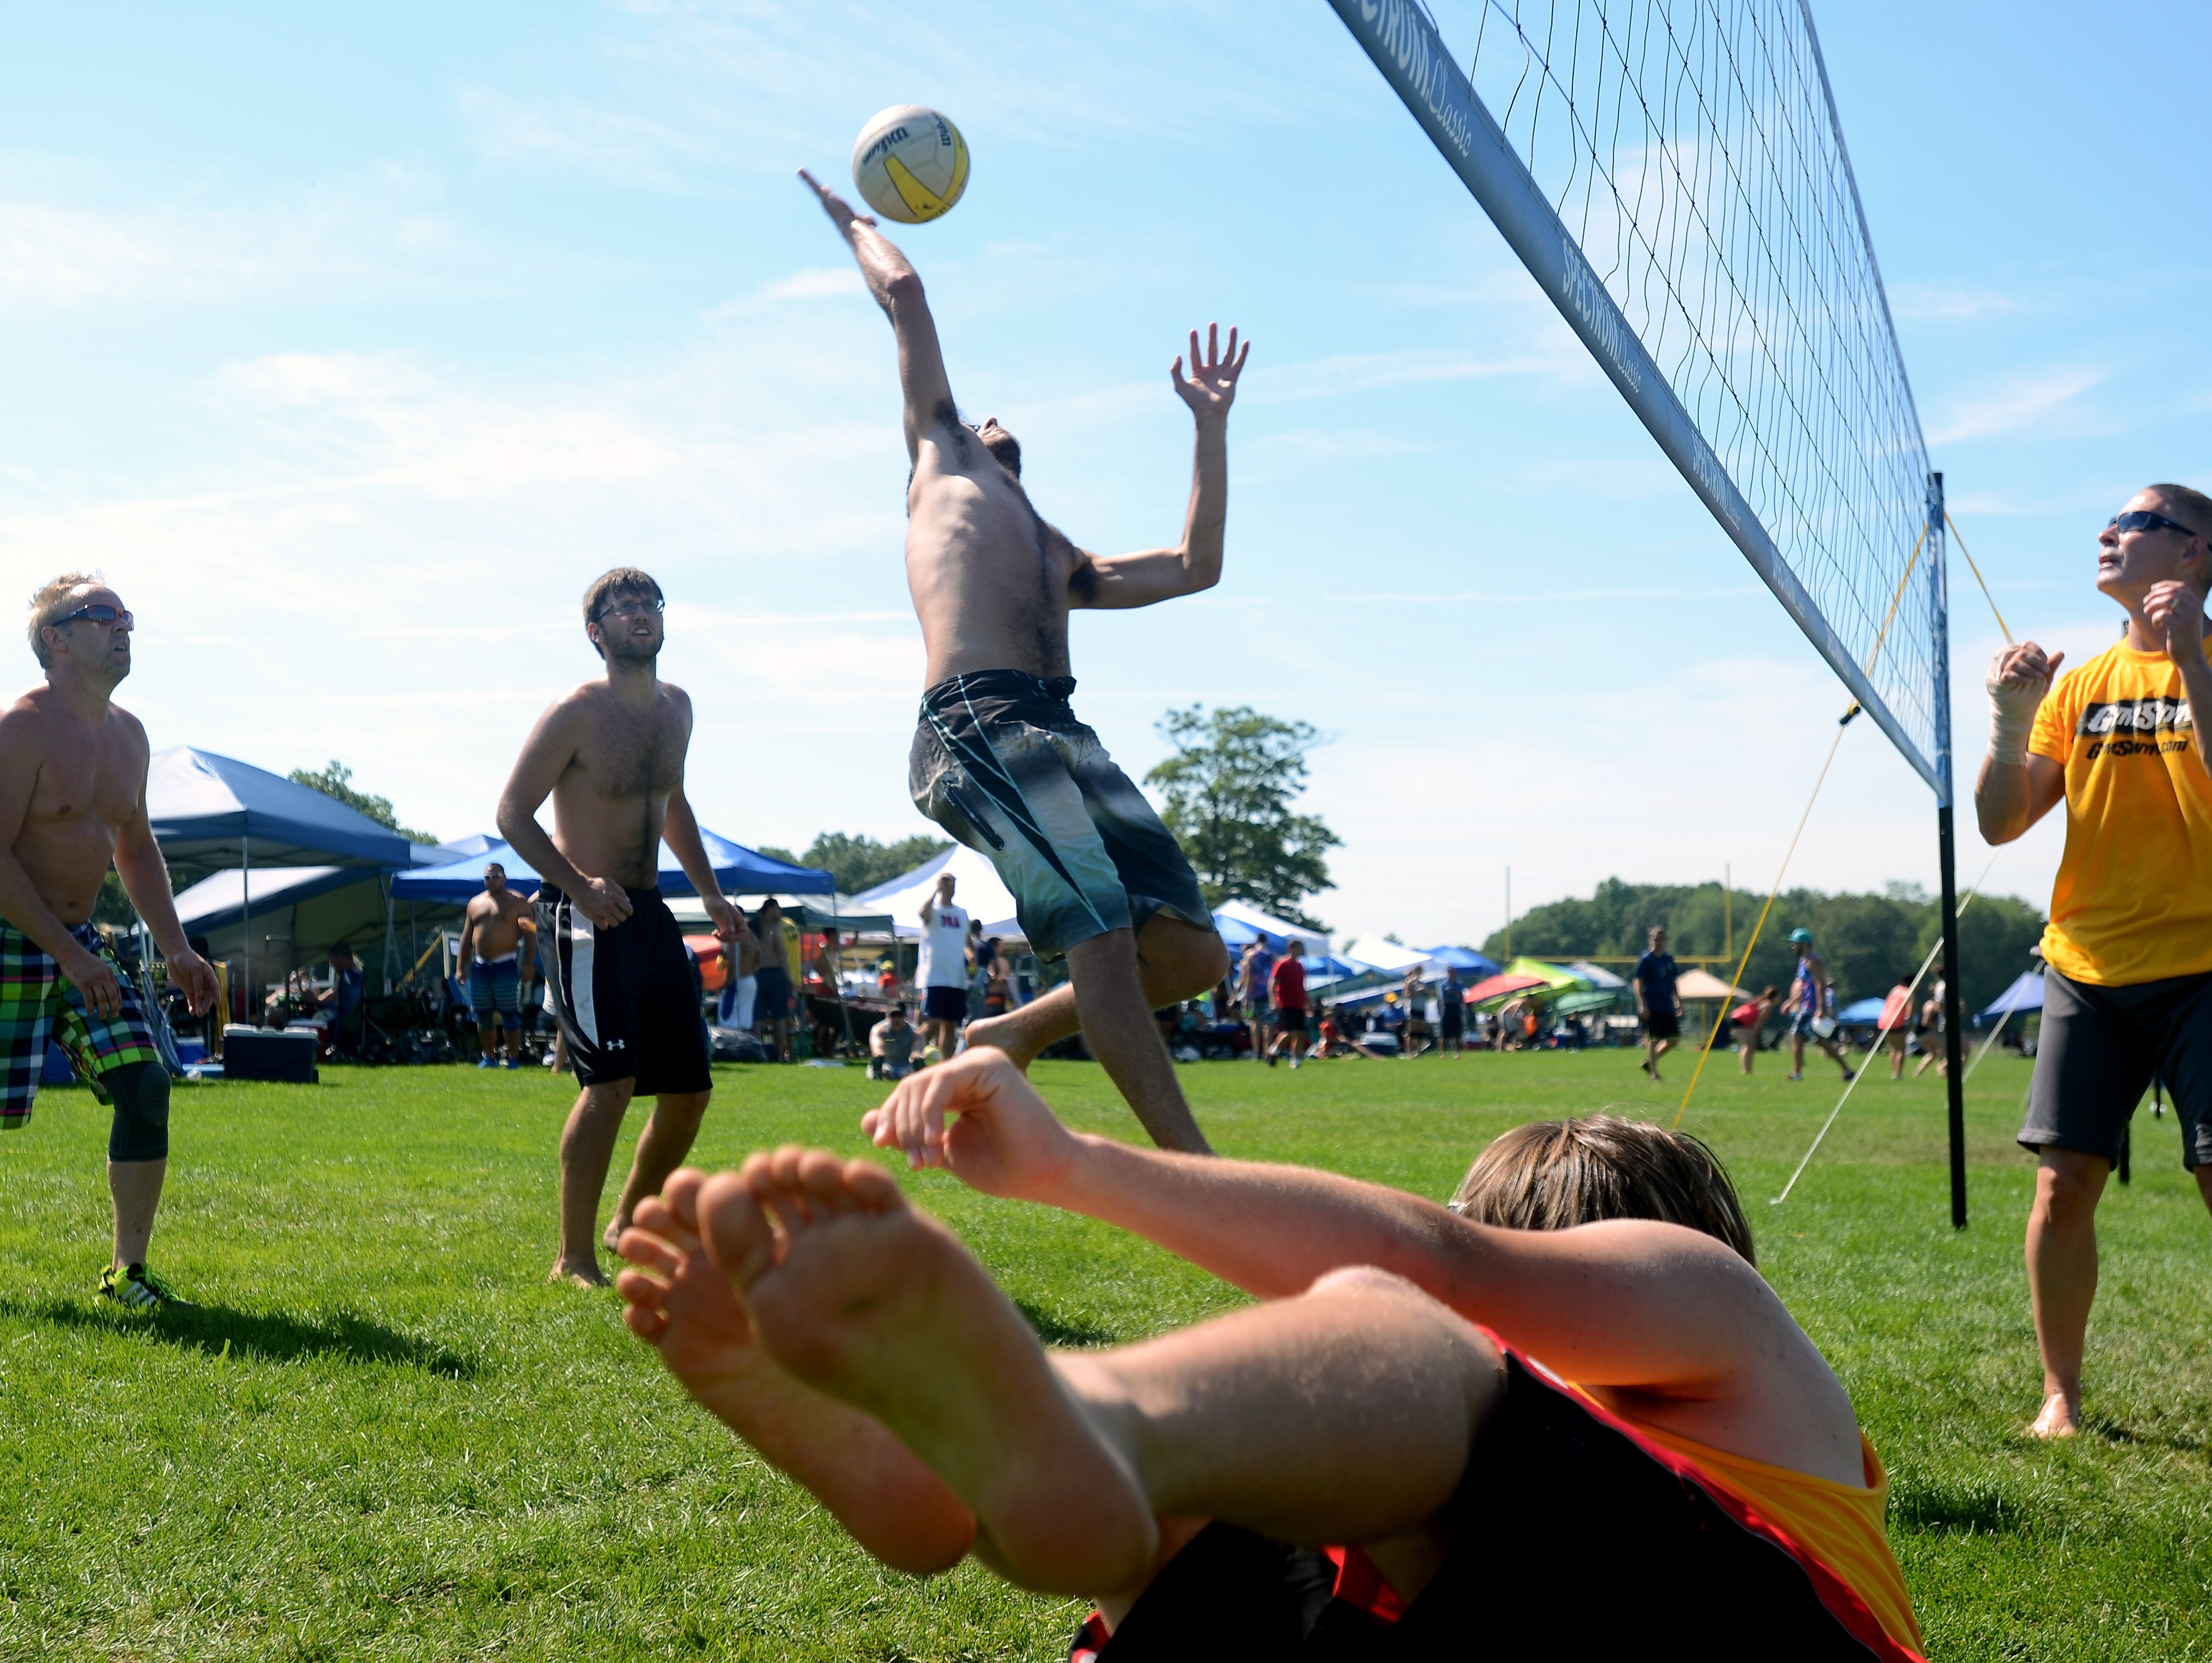 Gage Liberati, of Novi, hits a ball back Sunday, July 26, during the annual Volleygrass volleyball tournament at Port Huron Northern.